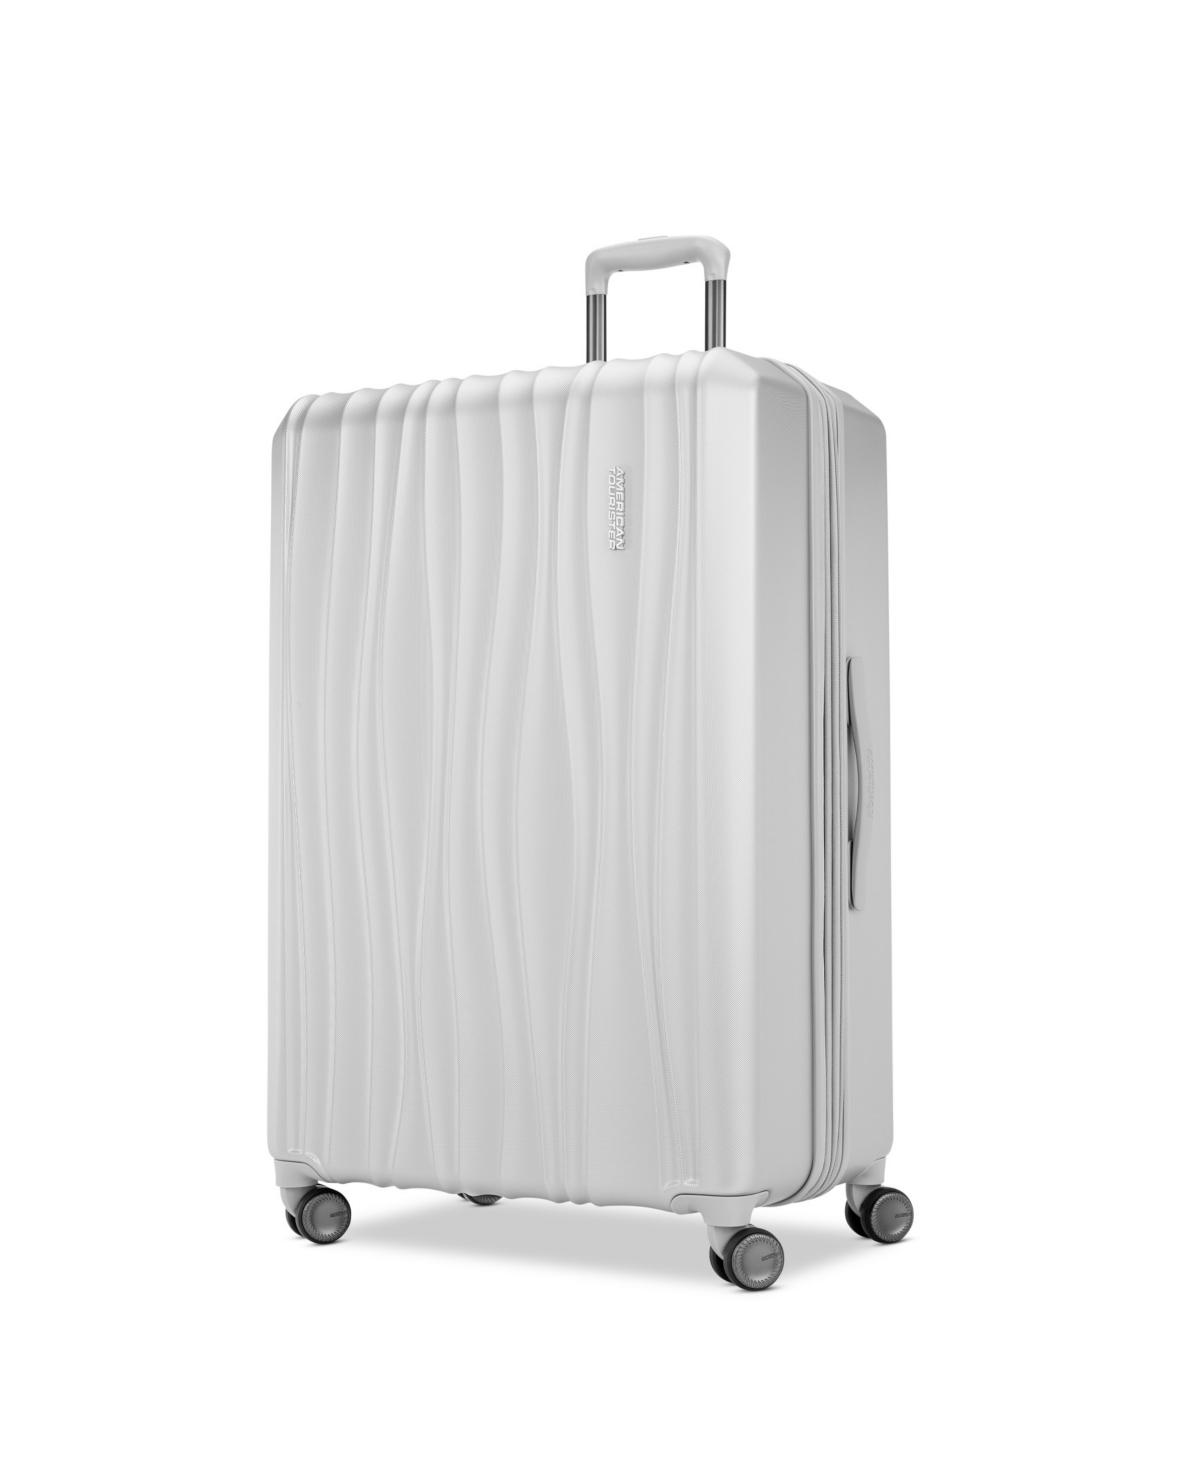 American Tourister Tribute Encore Hardside Check-in 28" Spinner Luggage In Silver